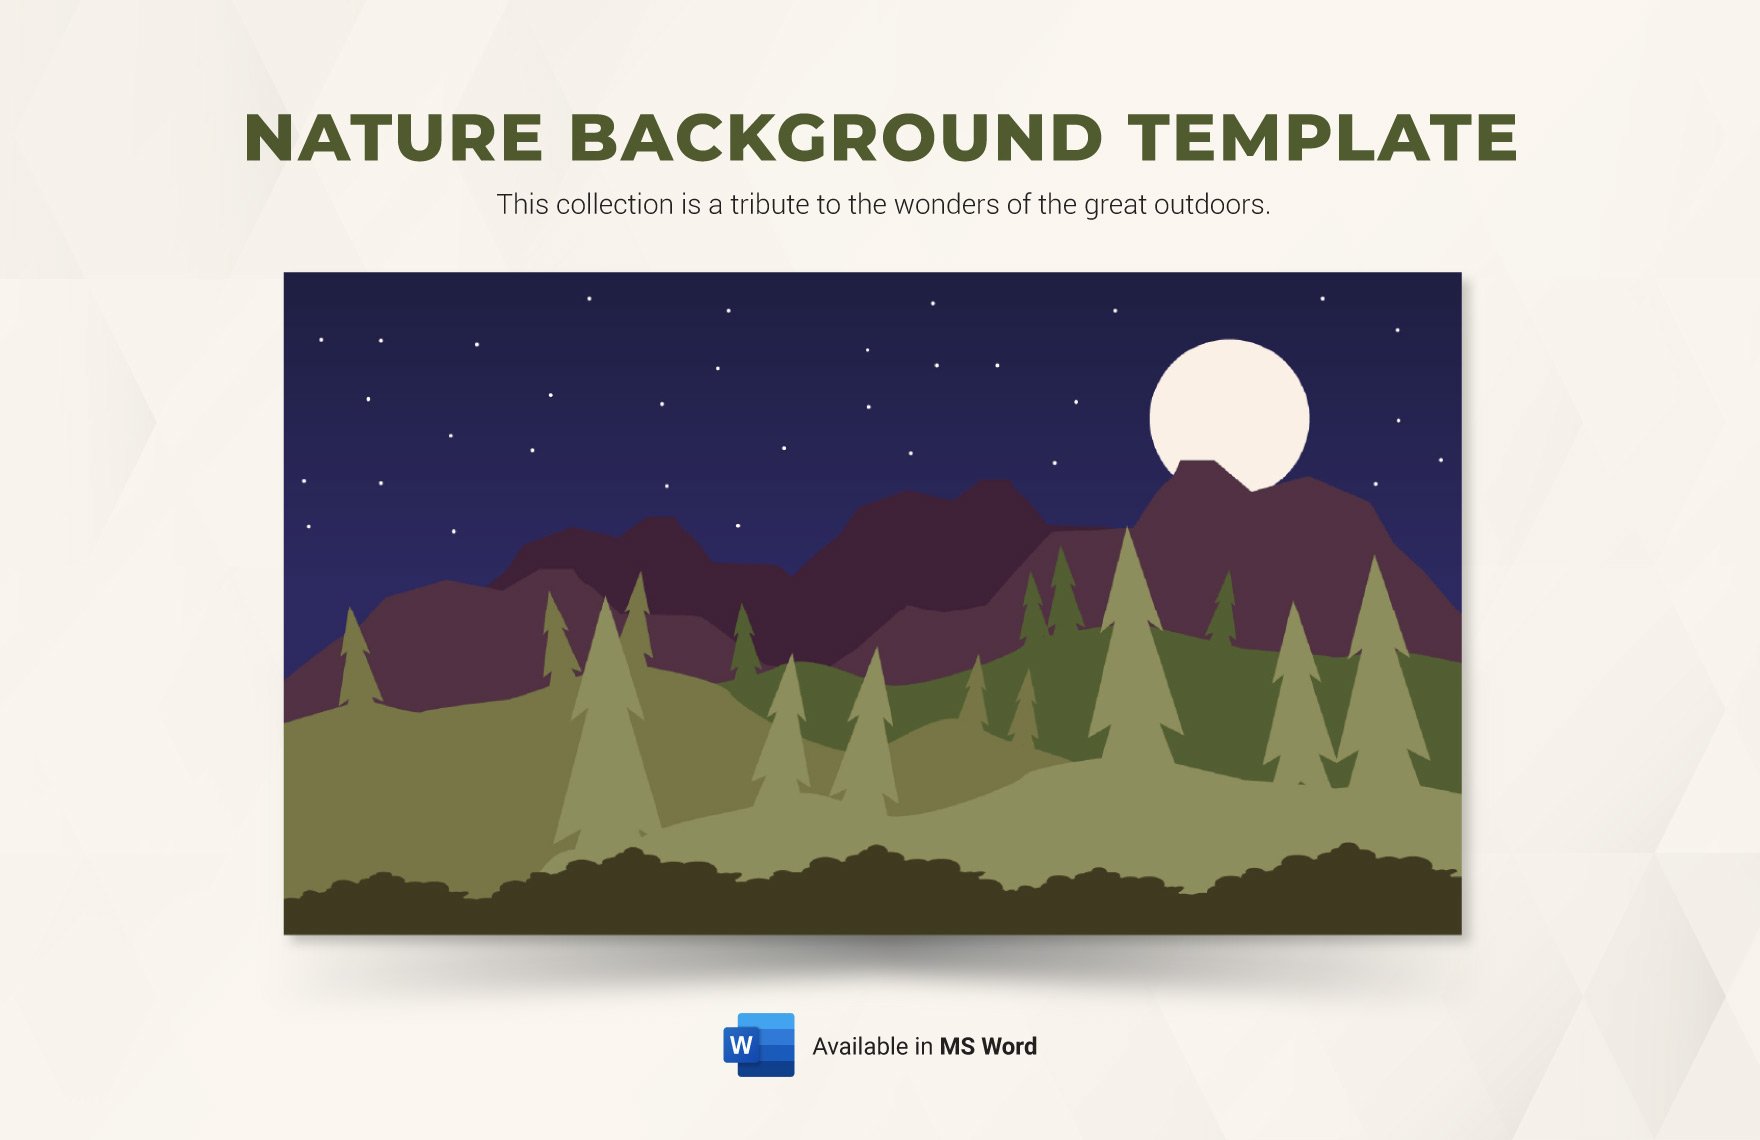 Nature Background Template